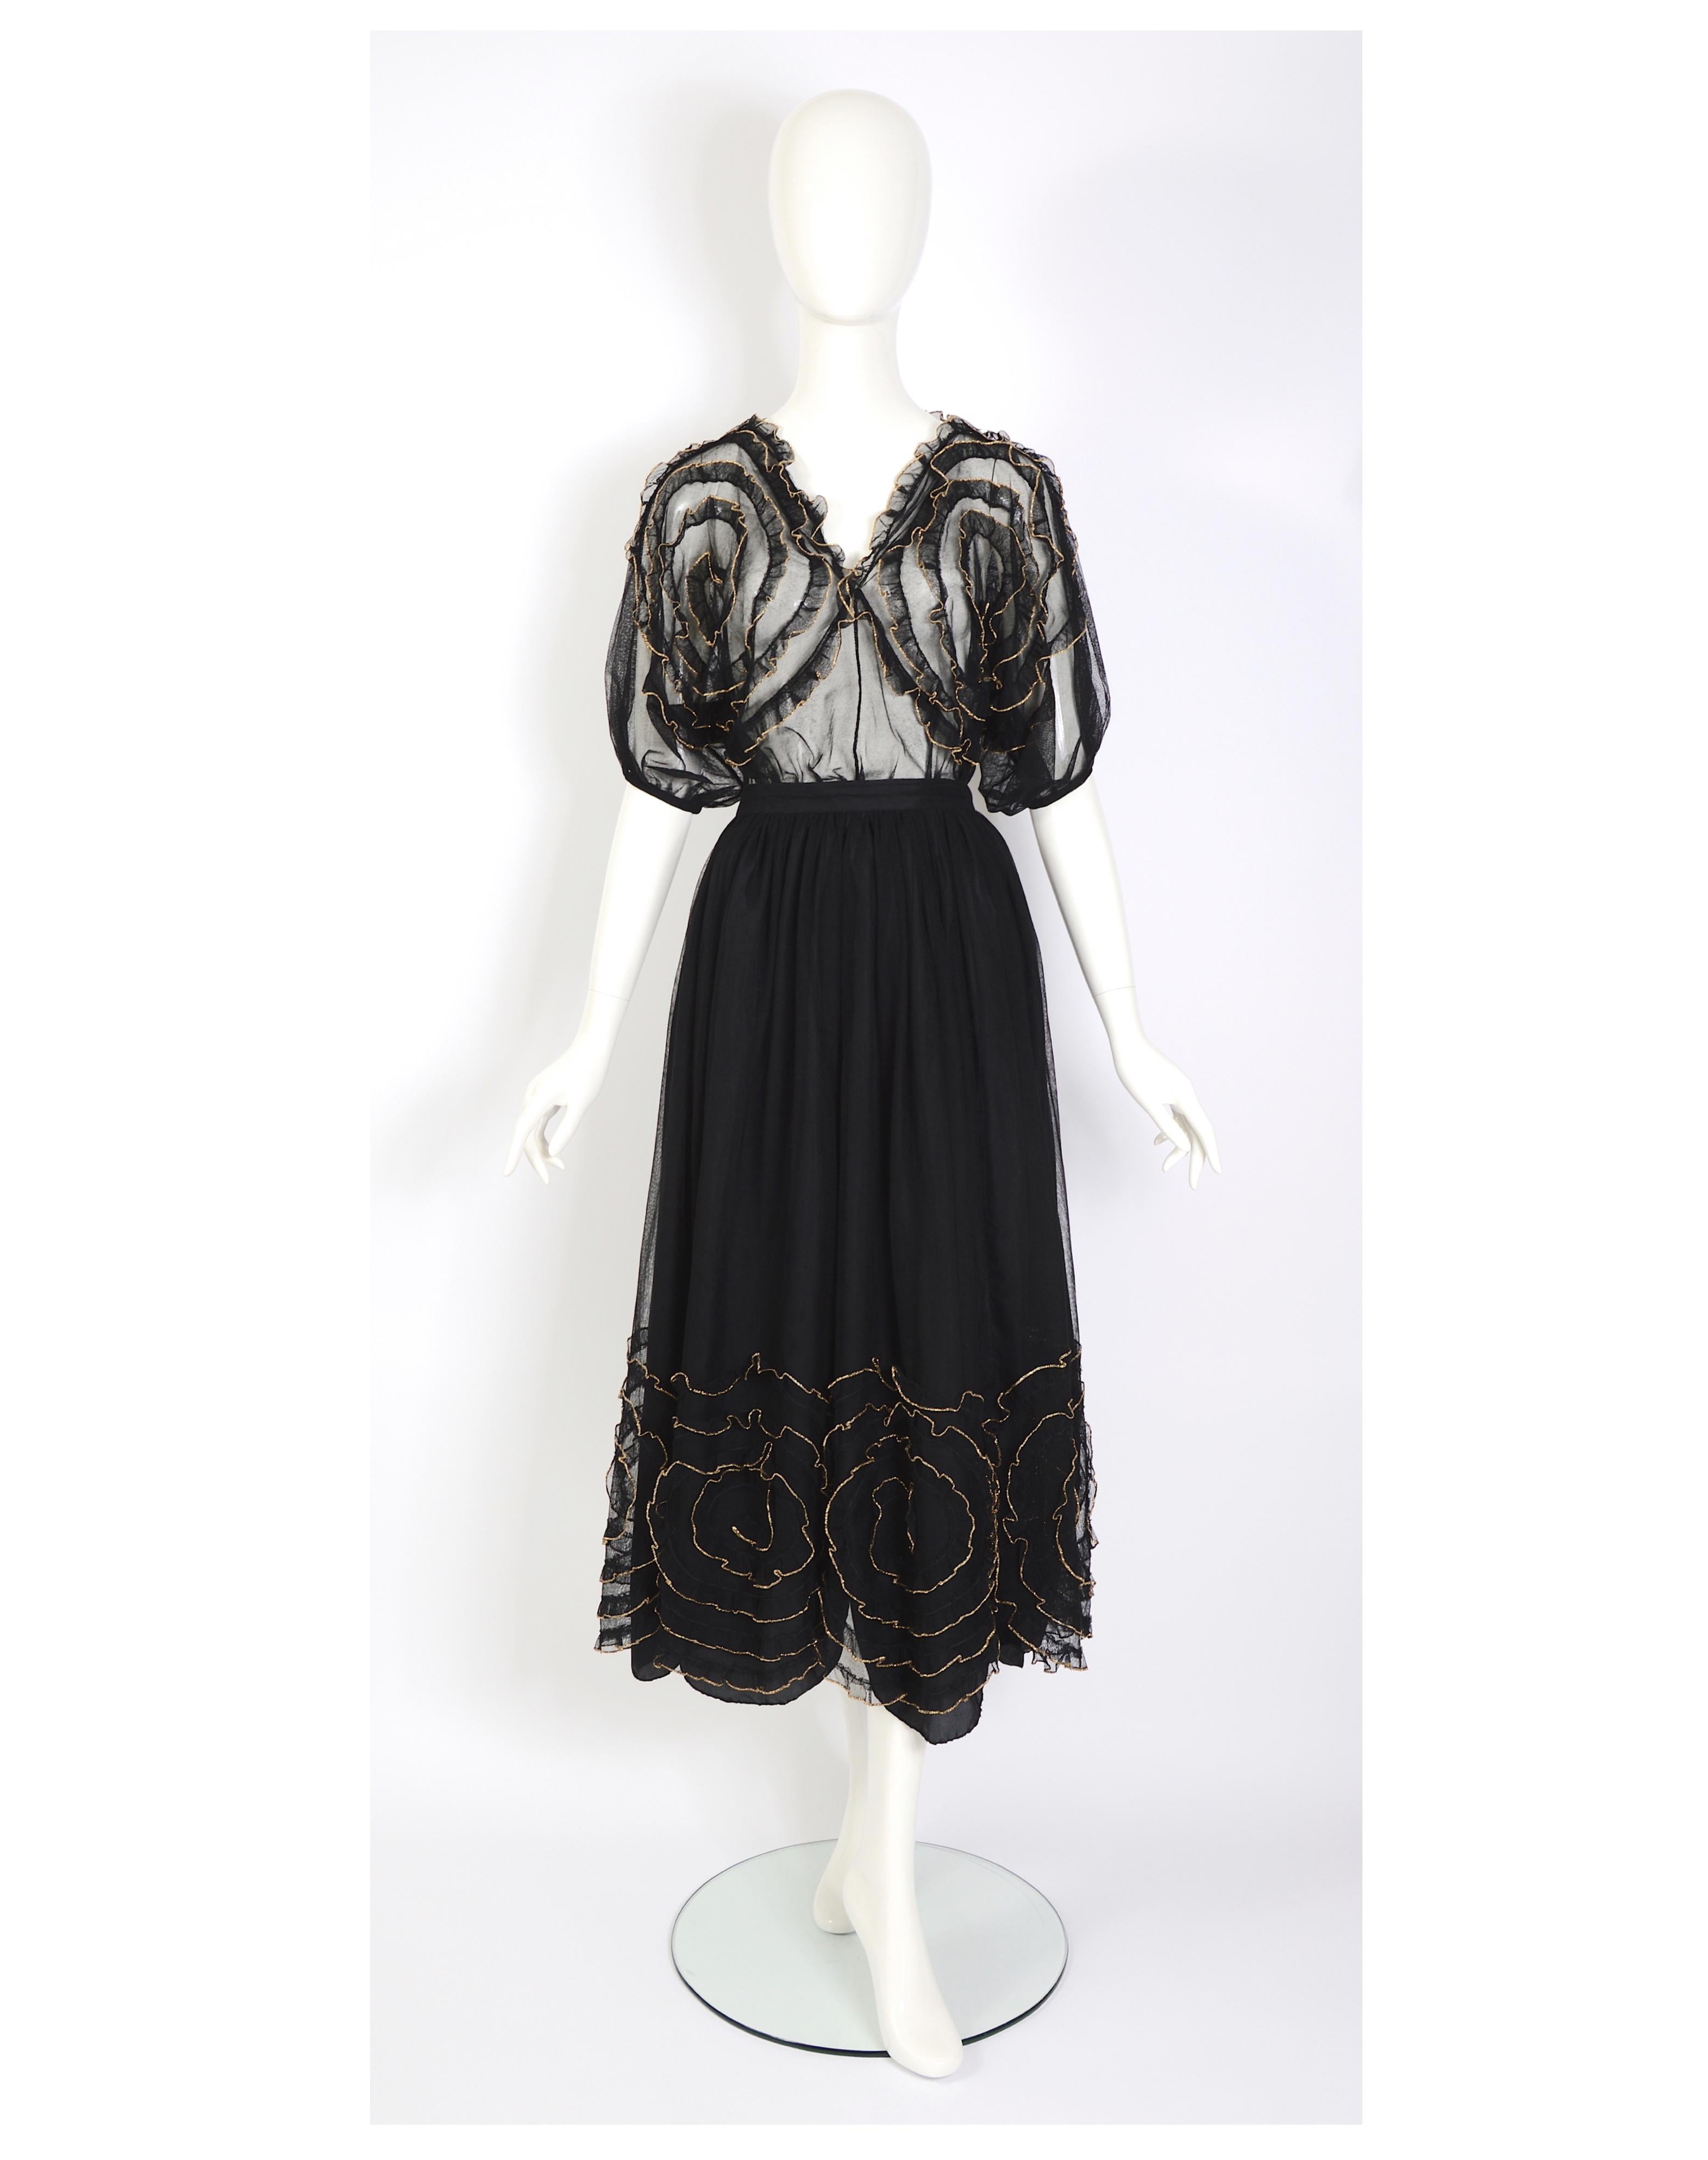 Verlaine Vintage is delighted to offer a stunning Chantal Thomass vintage ensemble consisting of a black tulle skirt and a matching top. Adorned with exquisitely crafted gold-edged flowers, this outfit is a true work of art. The top features these